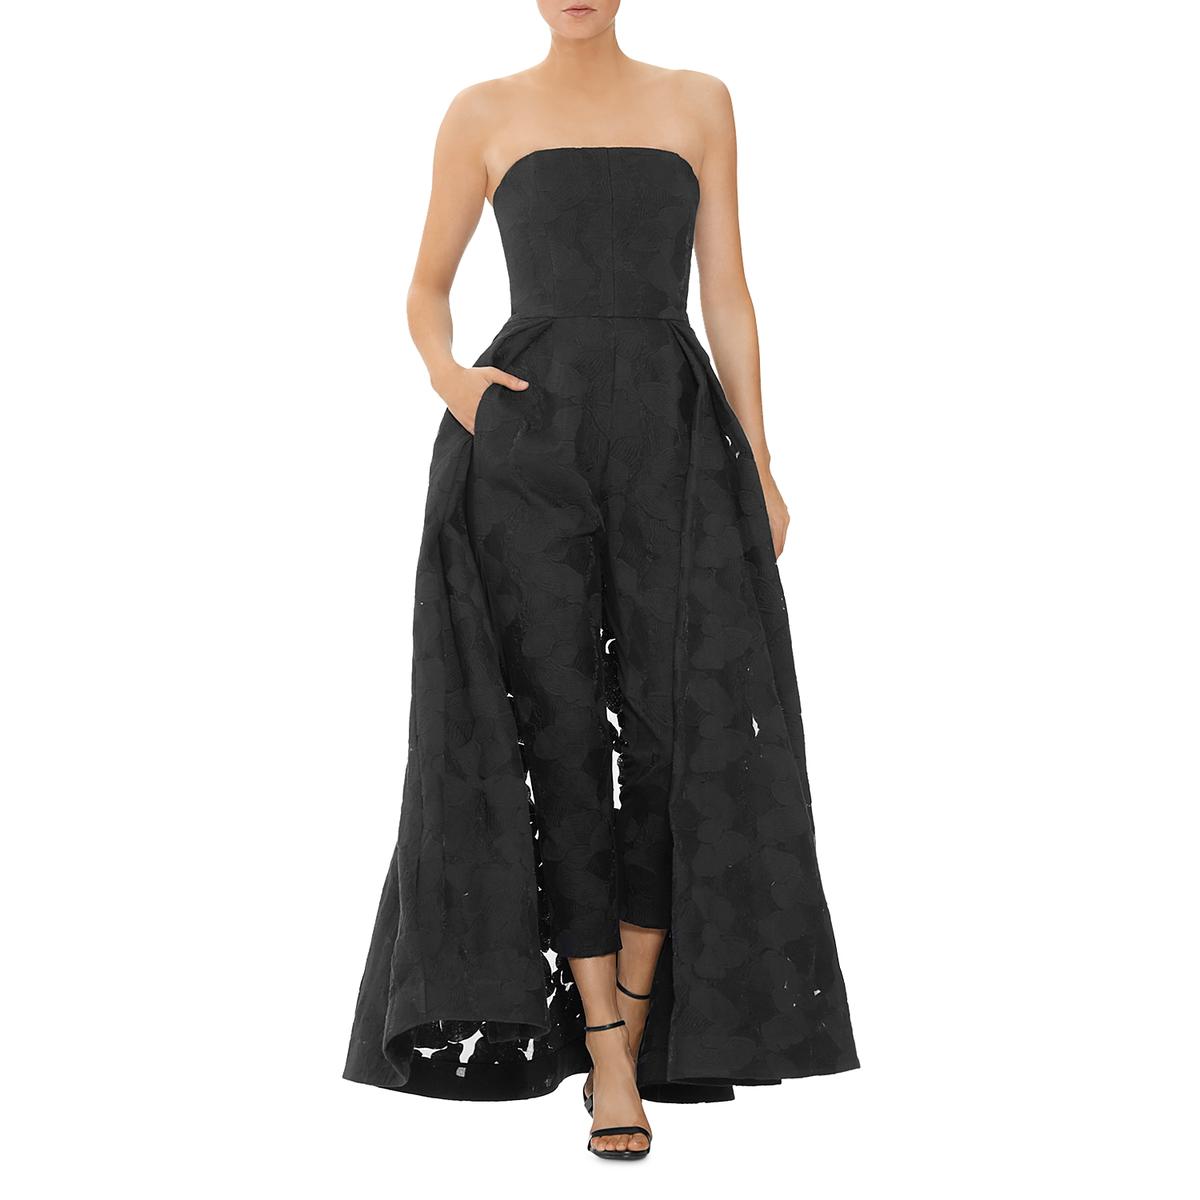 Jumpsuit with skirt overlay - butlerholoser